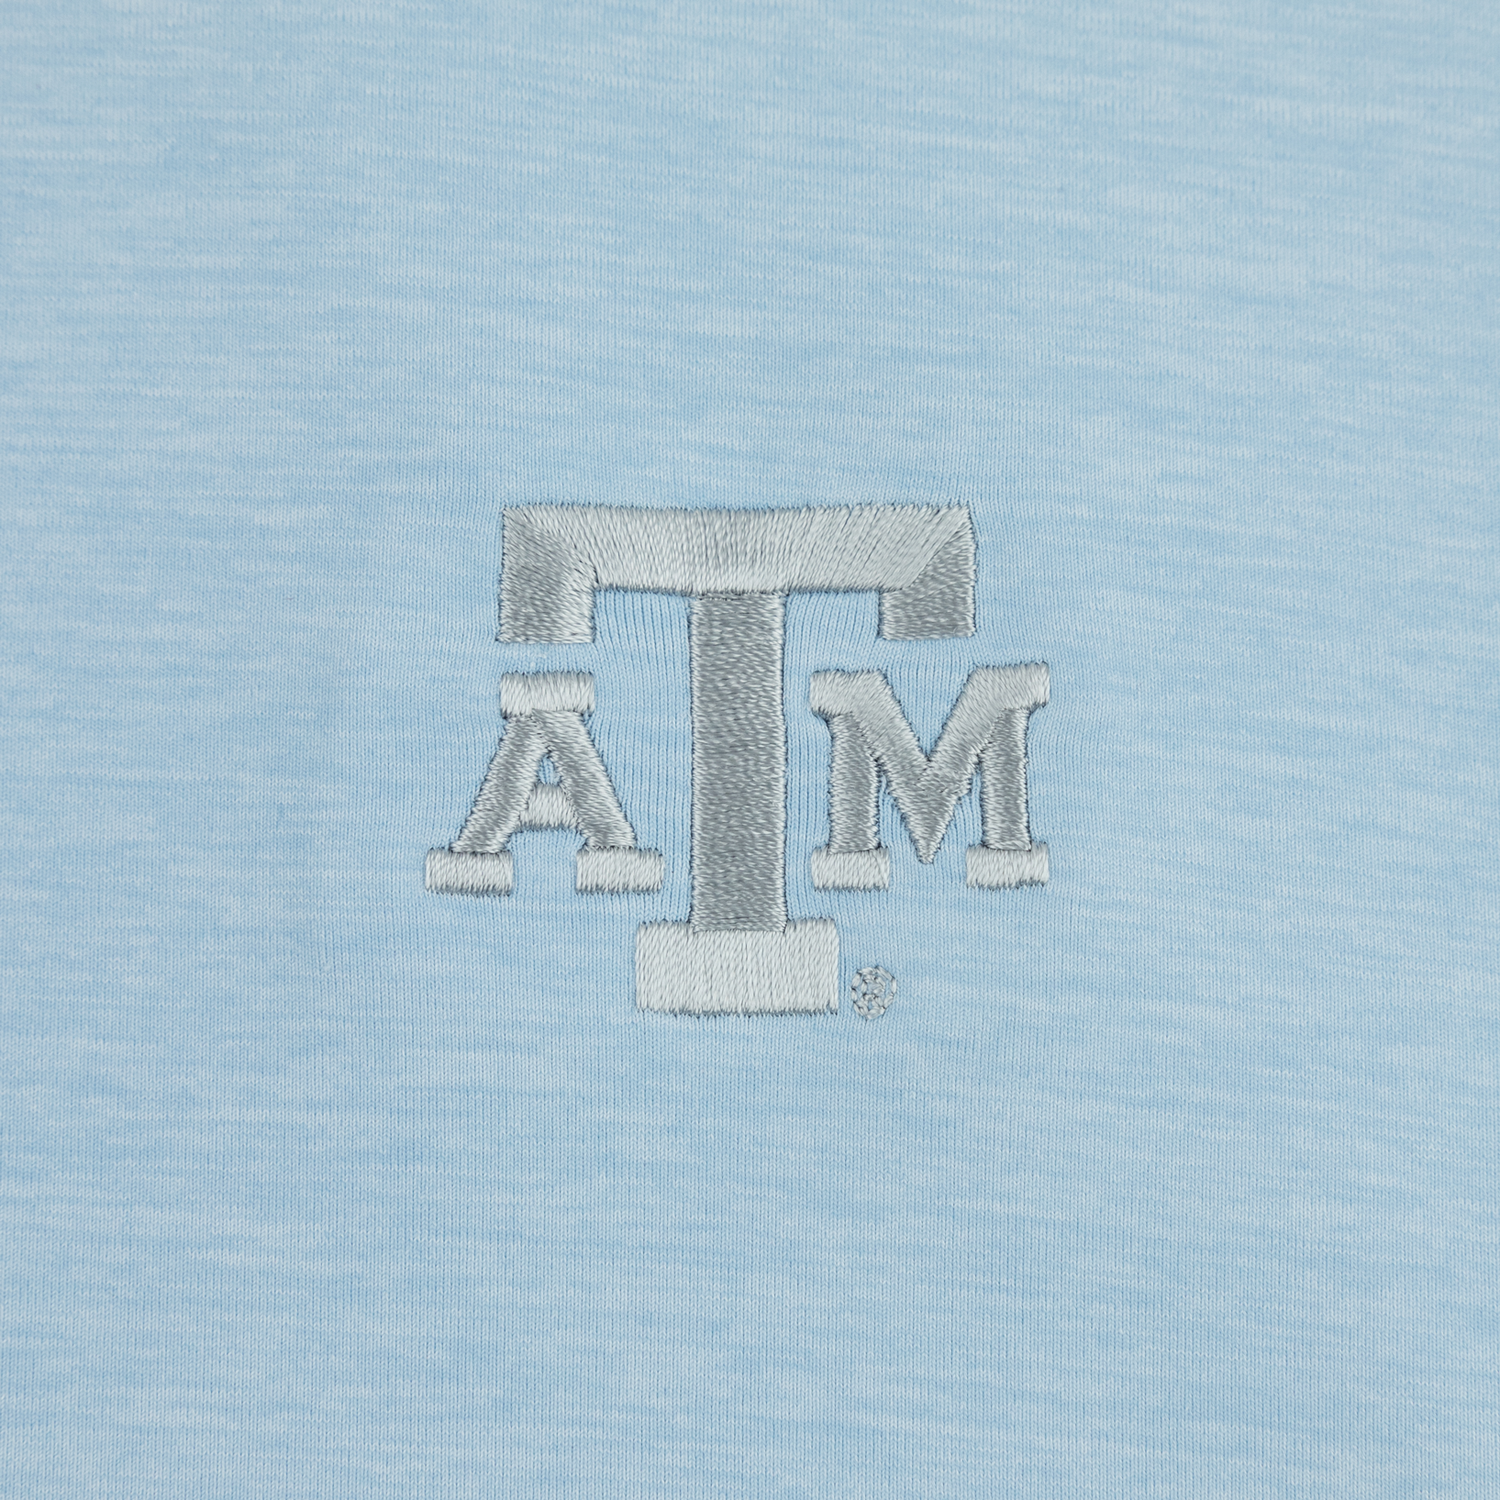 Texas A&M Gen Teal Heathered Brr Performance Polo